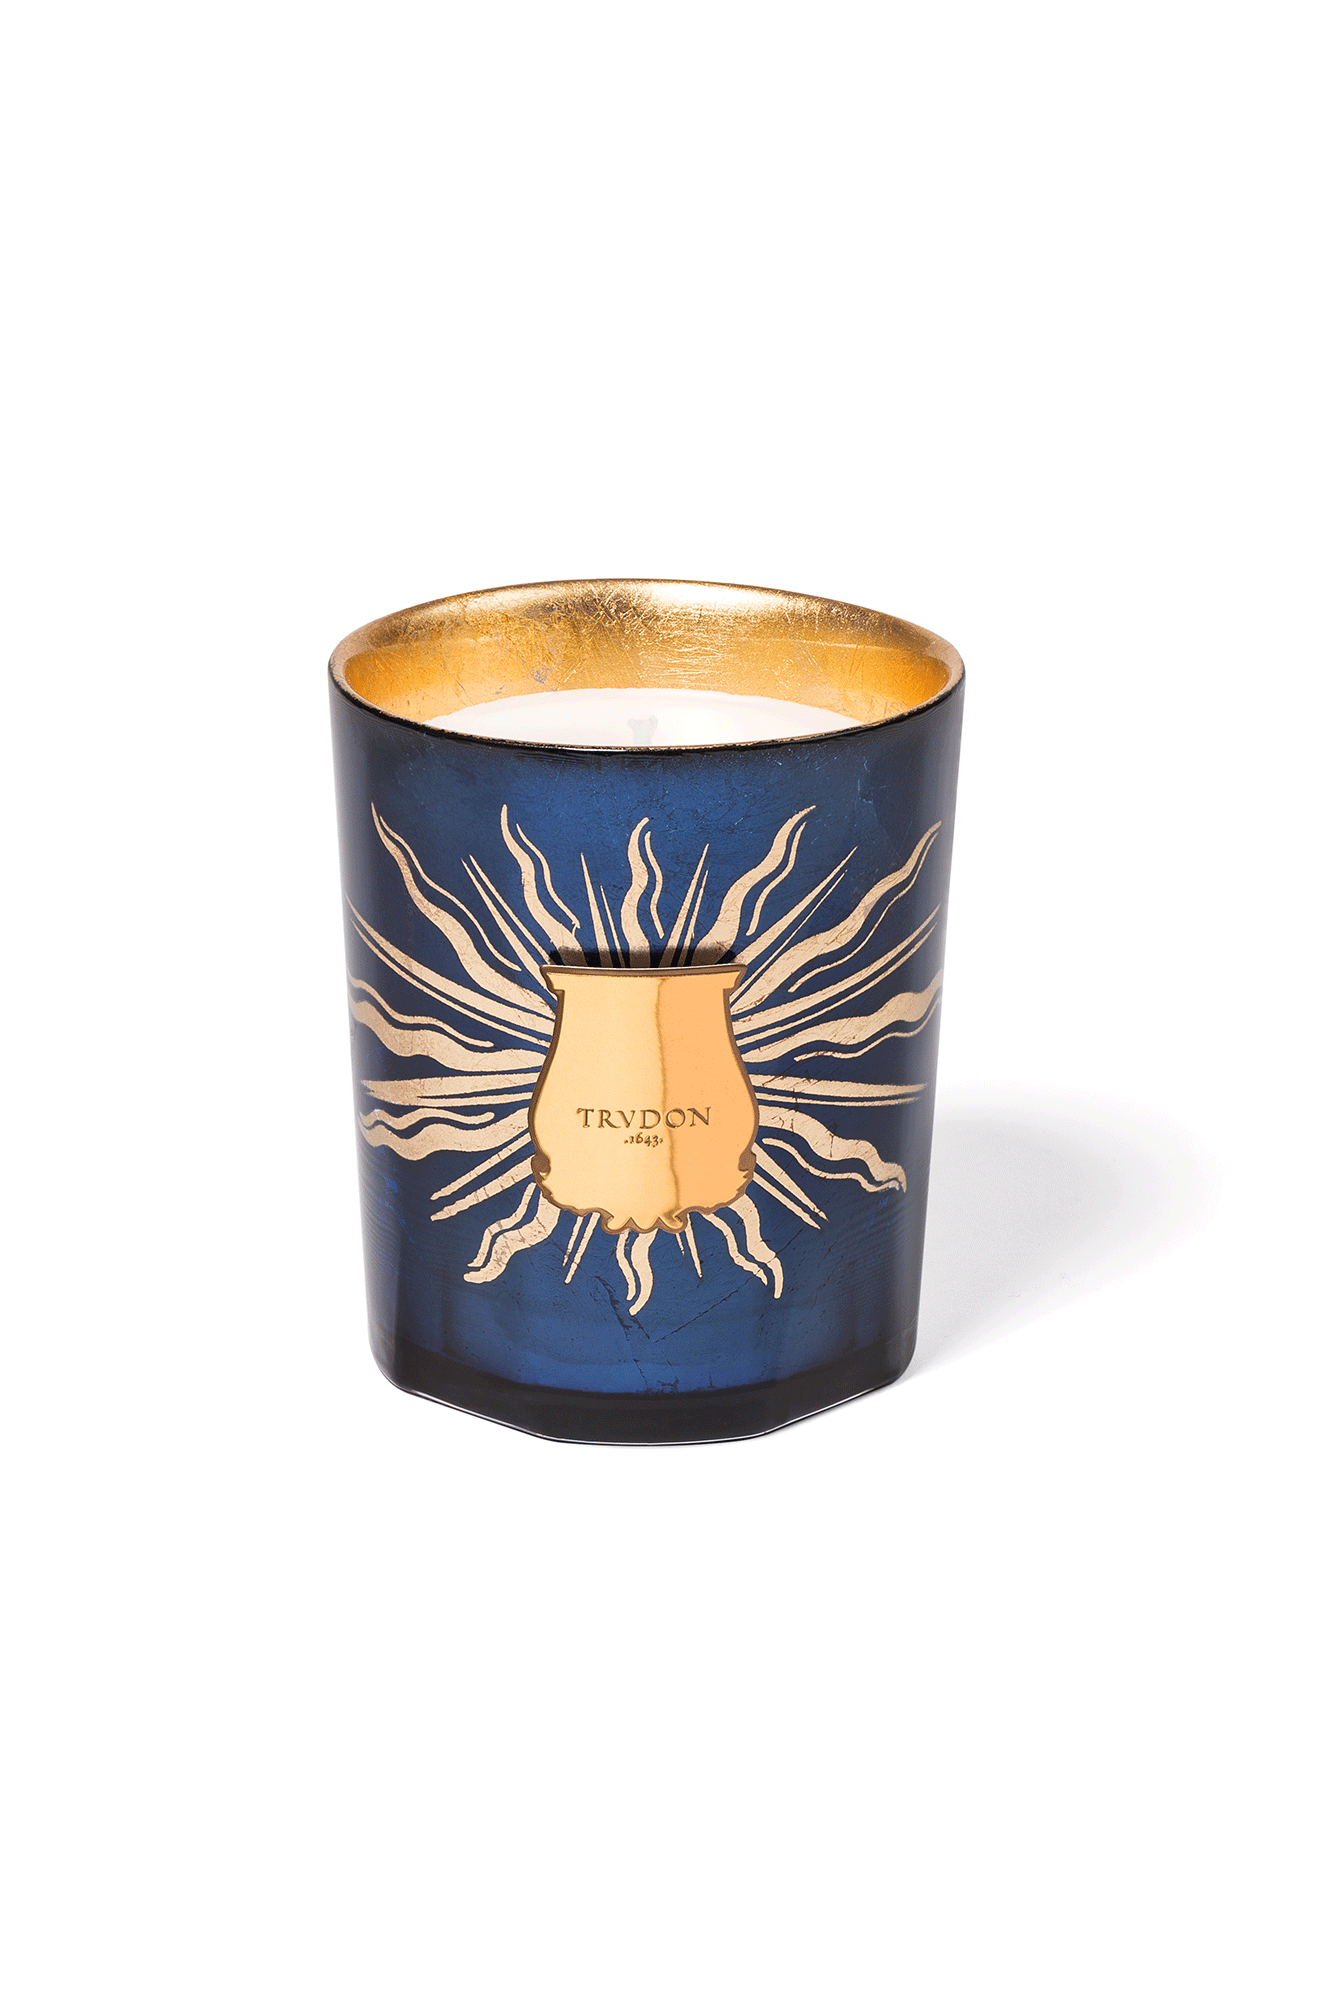 The Trudon Classic Candle fits all occasions and perfumes each and every room. Available in all scents, it is the most iconic of the collection. They are manufactured at the Trudon workshop in Normandy, France, using unrivaled know-how inherited from master candle makers.